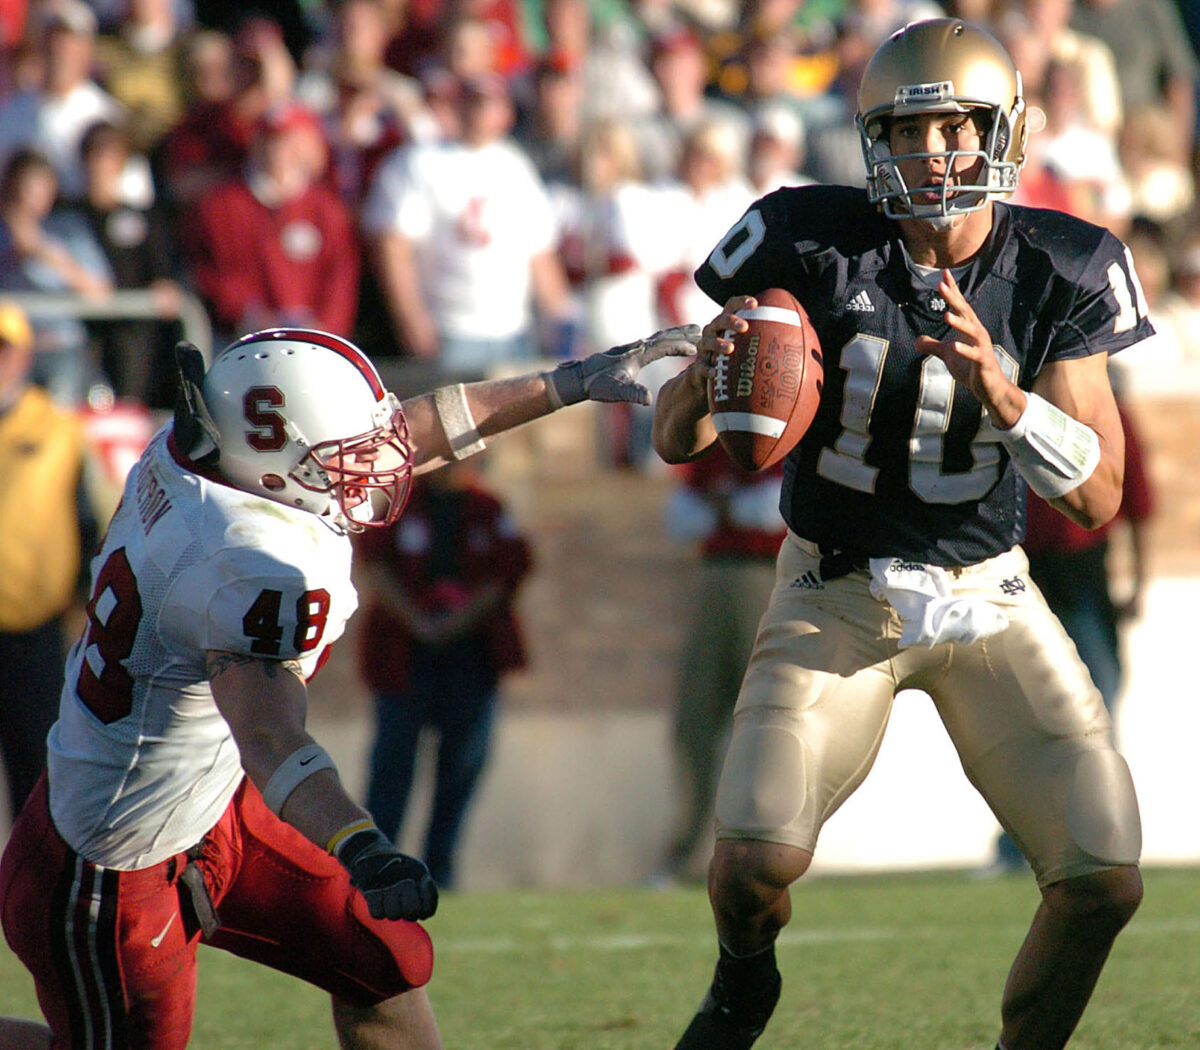 Watch: 2004 highlights of Notre Dame win over Stanford